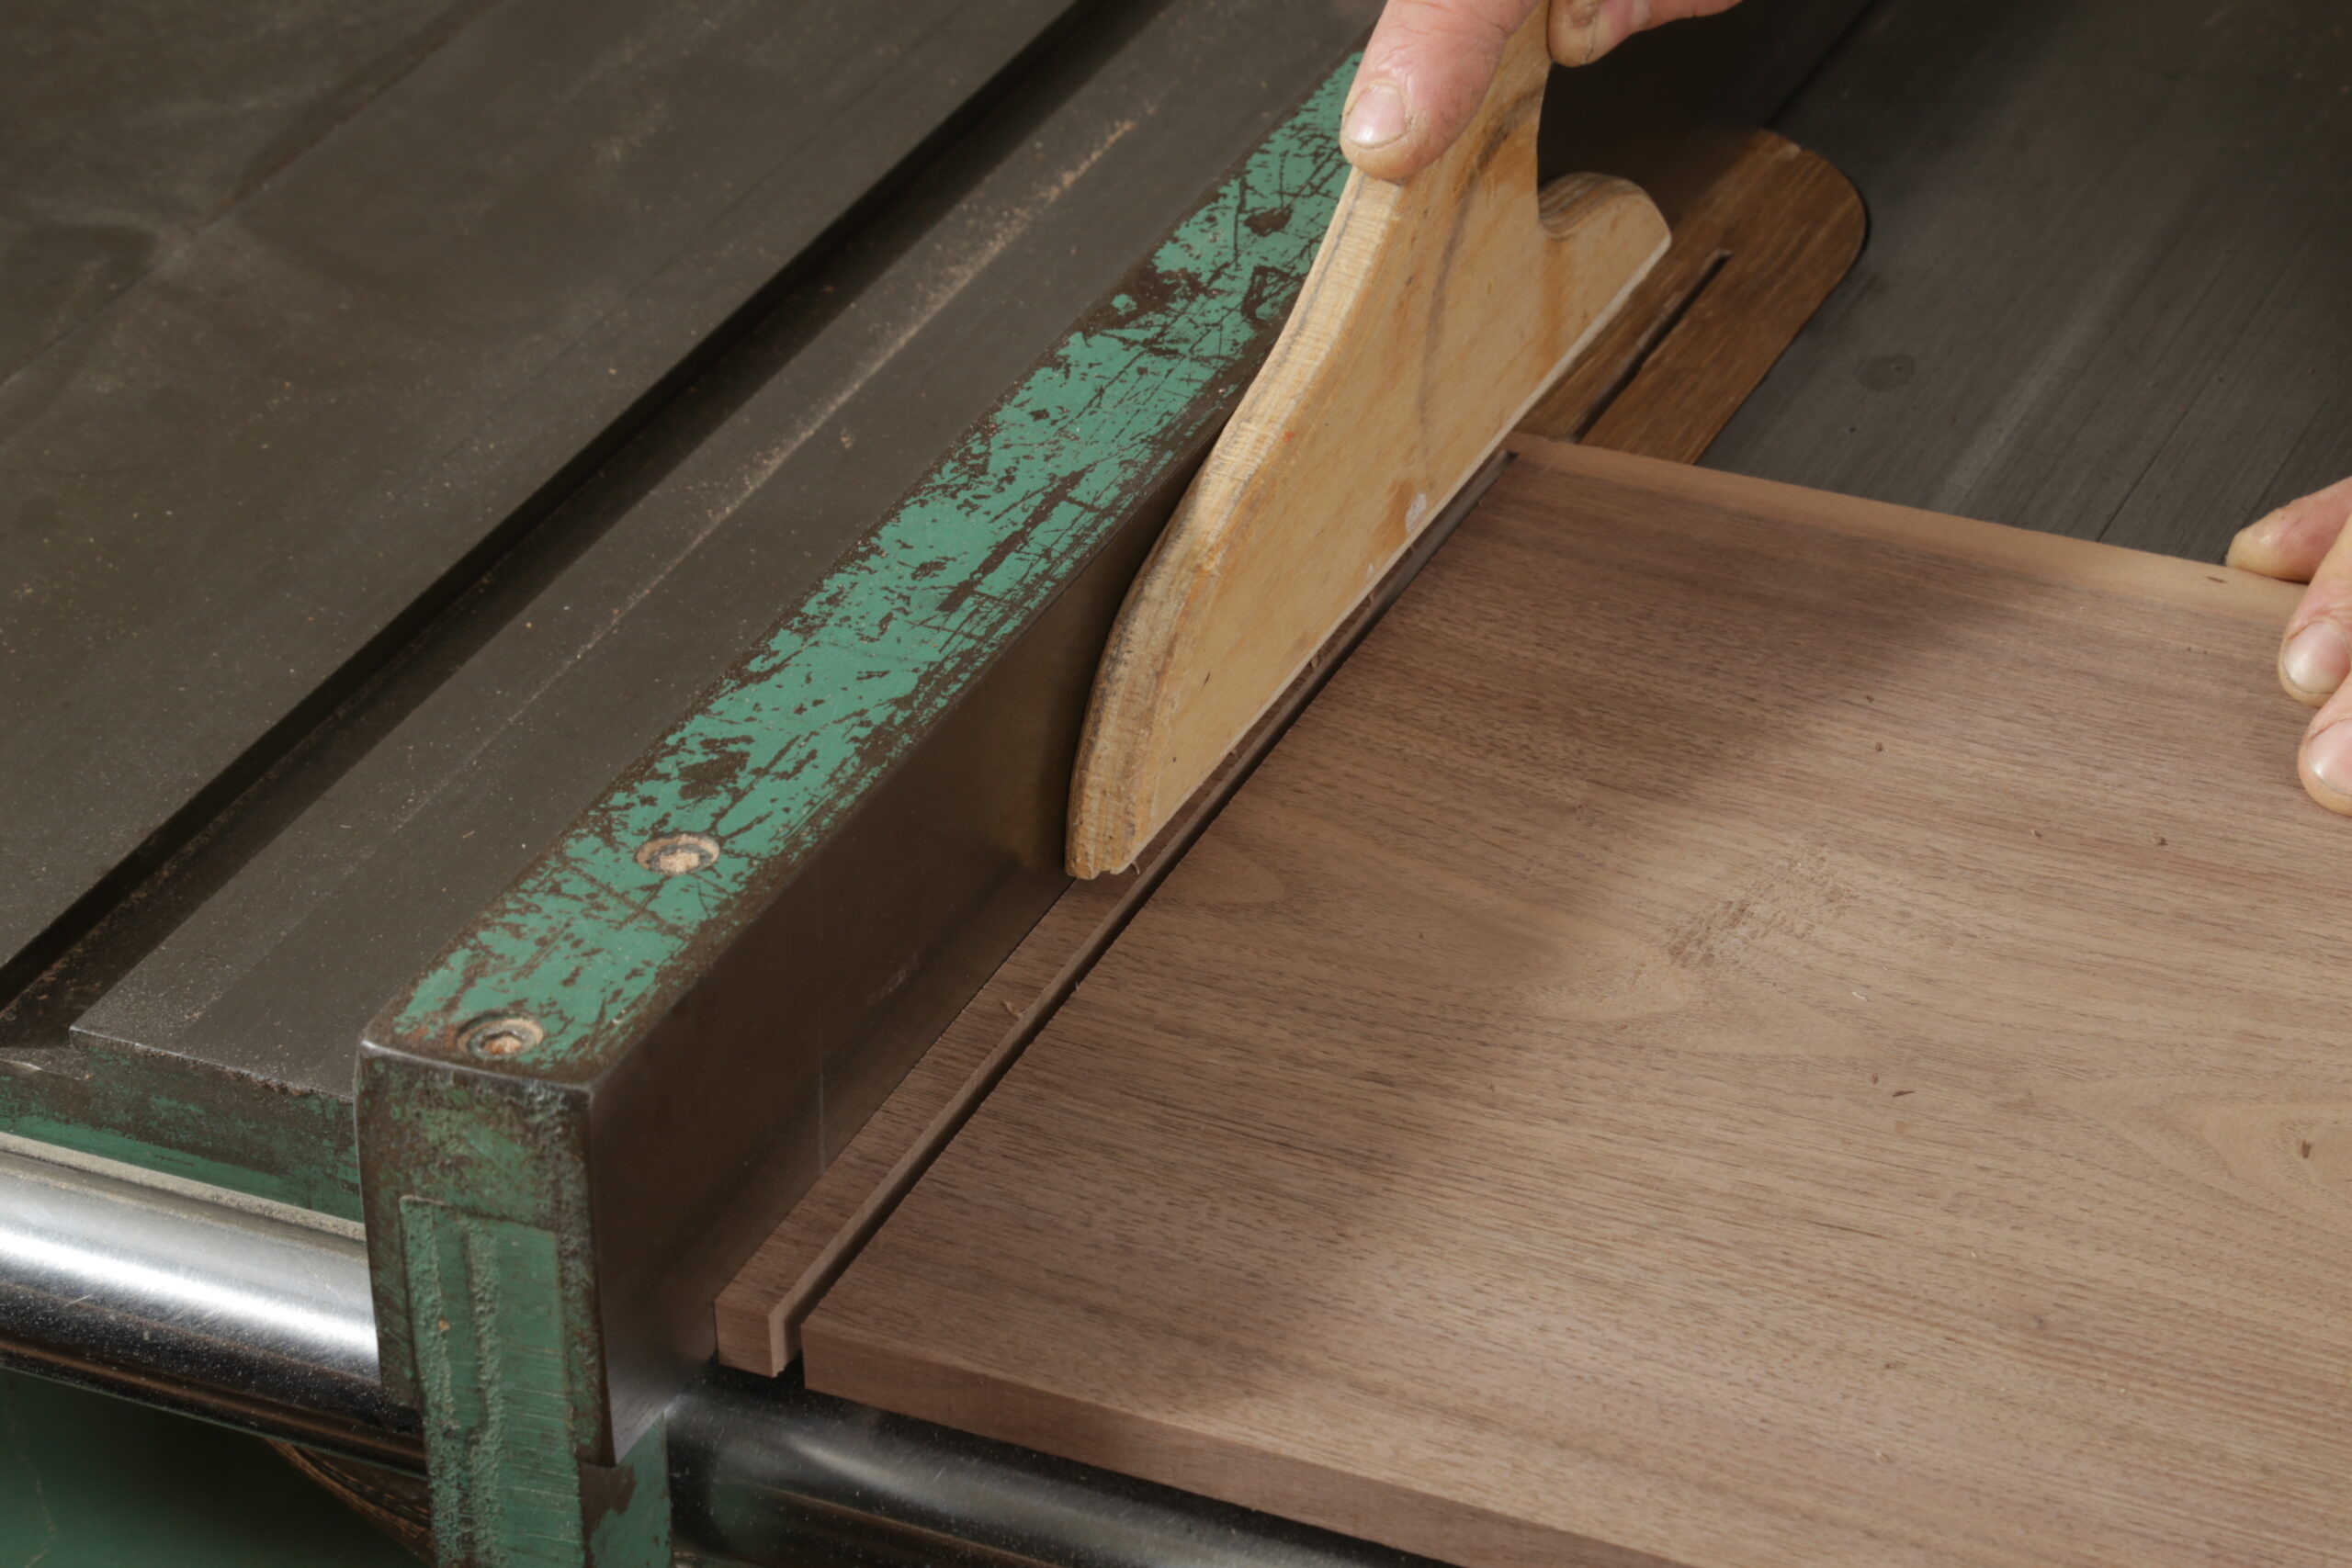 The author crosscutting a narrow strip from the end of a walnut board. This strip will be a runner for drawers. or safety, he is using a push stick to keep his right hand away from the blade.